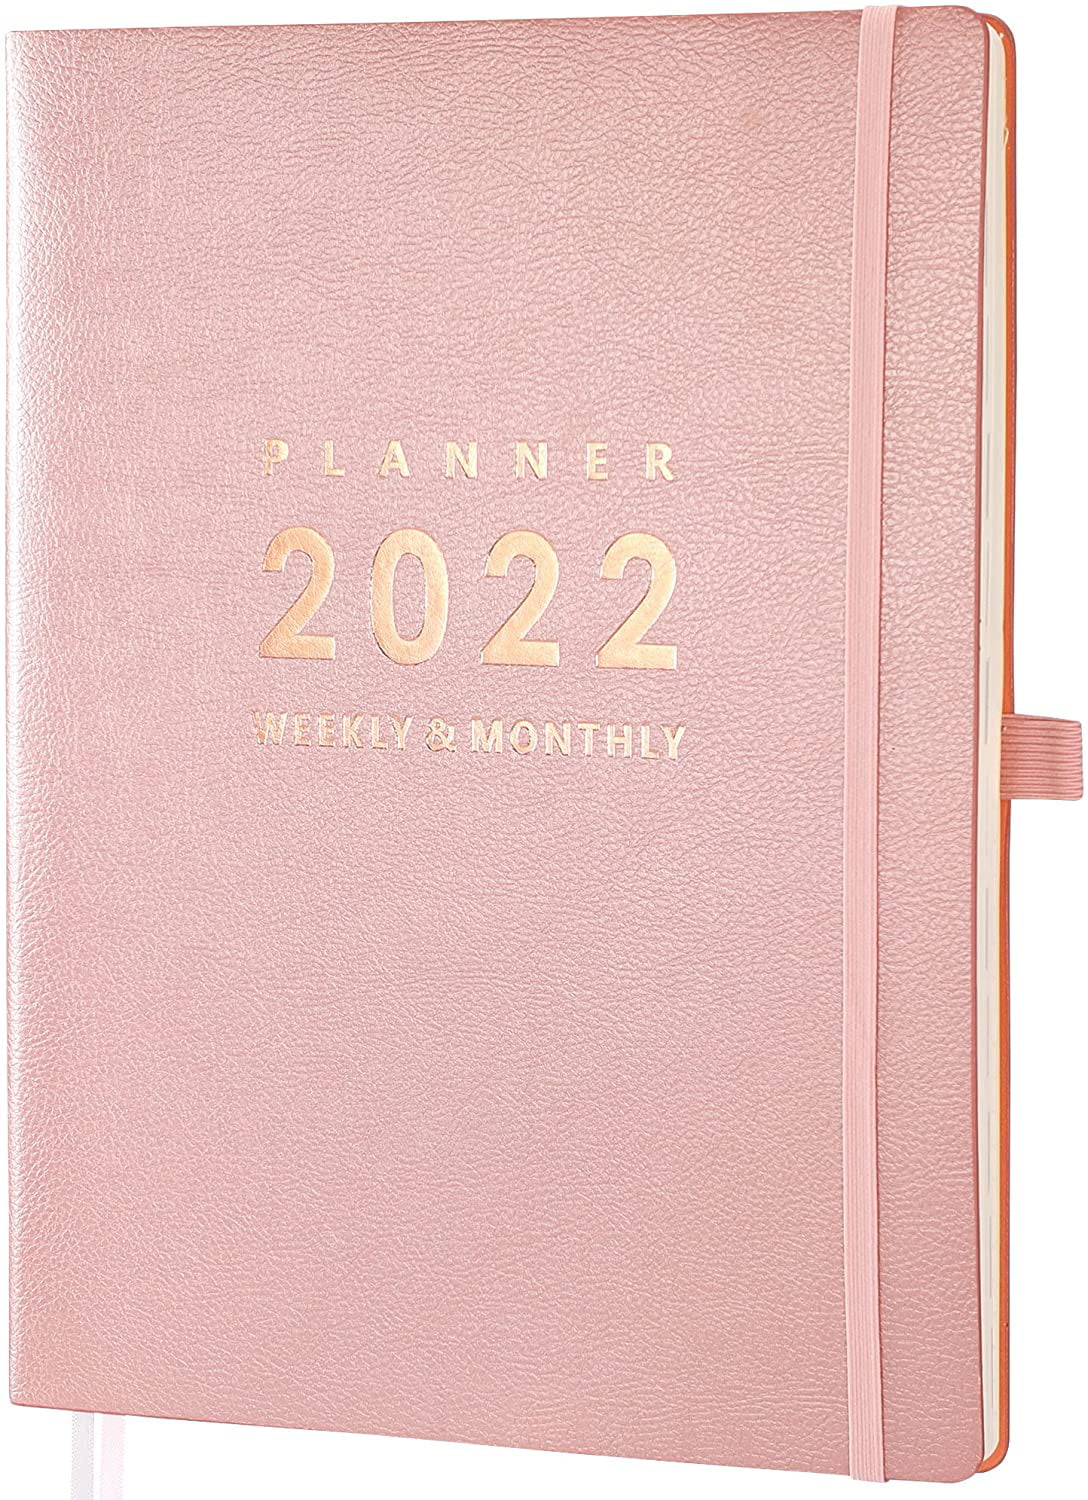 Undated Weekly Planner With 12 Monthly Calendar A5 Faux Leather Soft Cover For